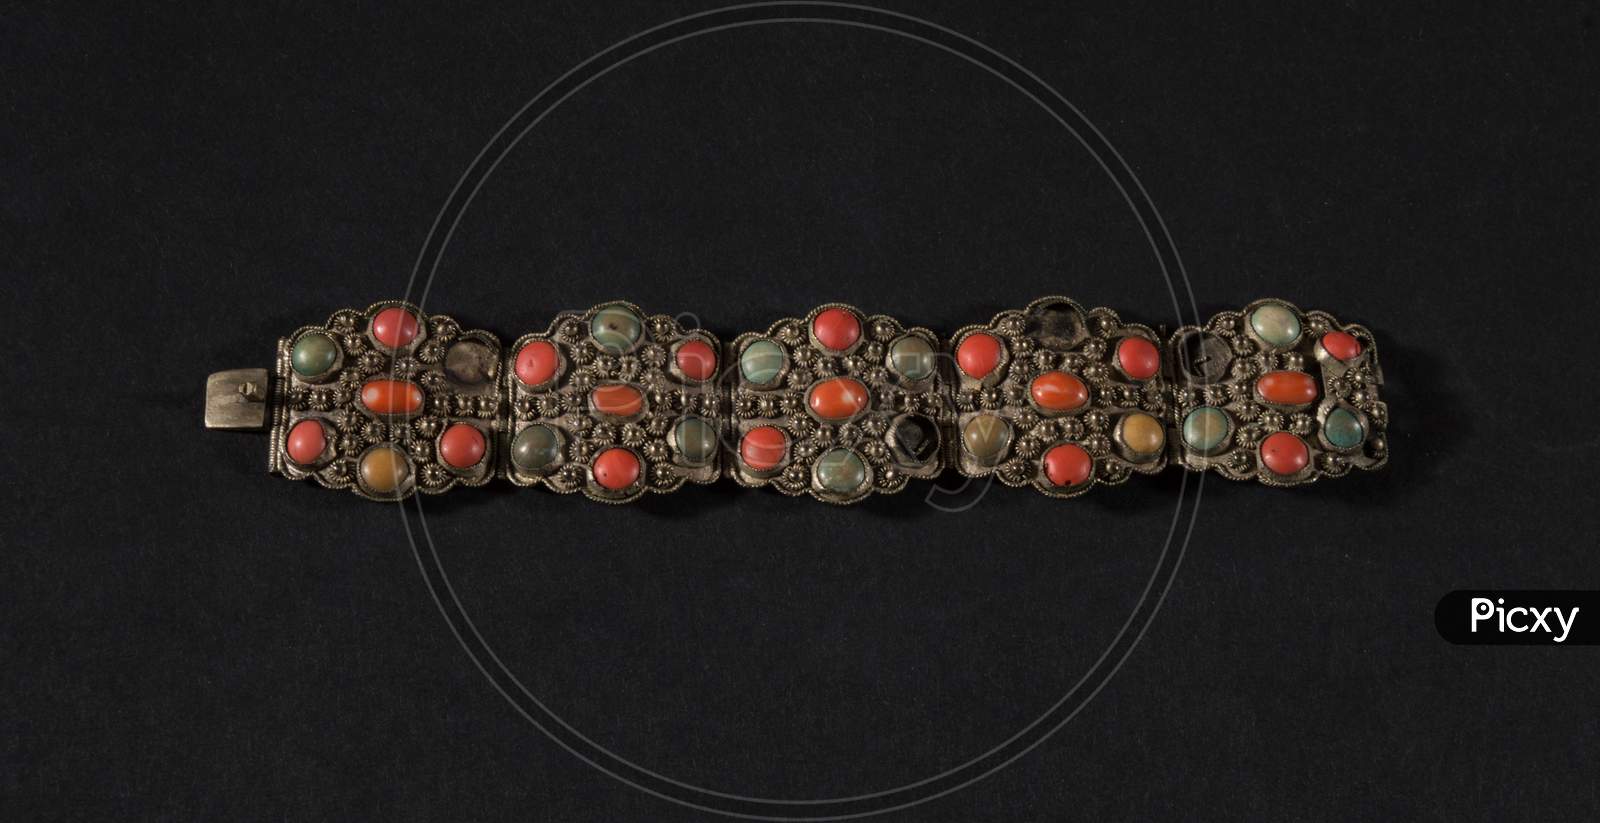 A Beautiful Antique Indian Bracelet Isolated On Black Background With Diamond And Stone